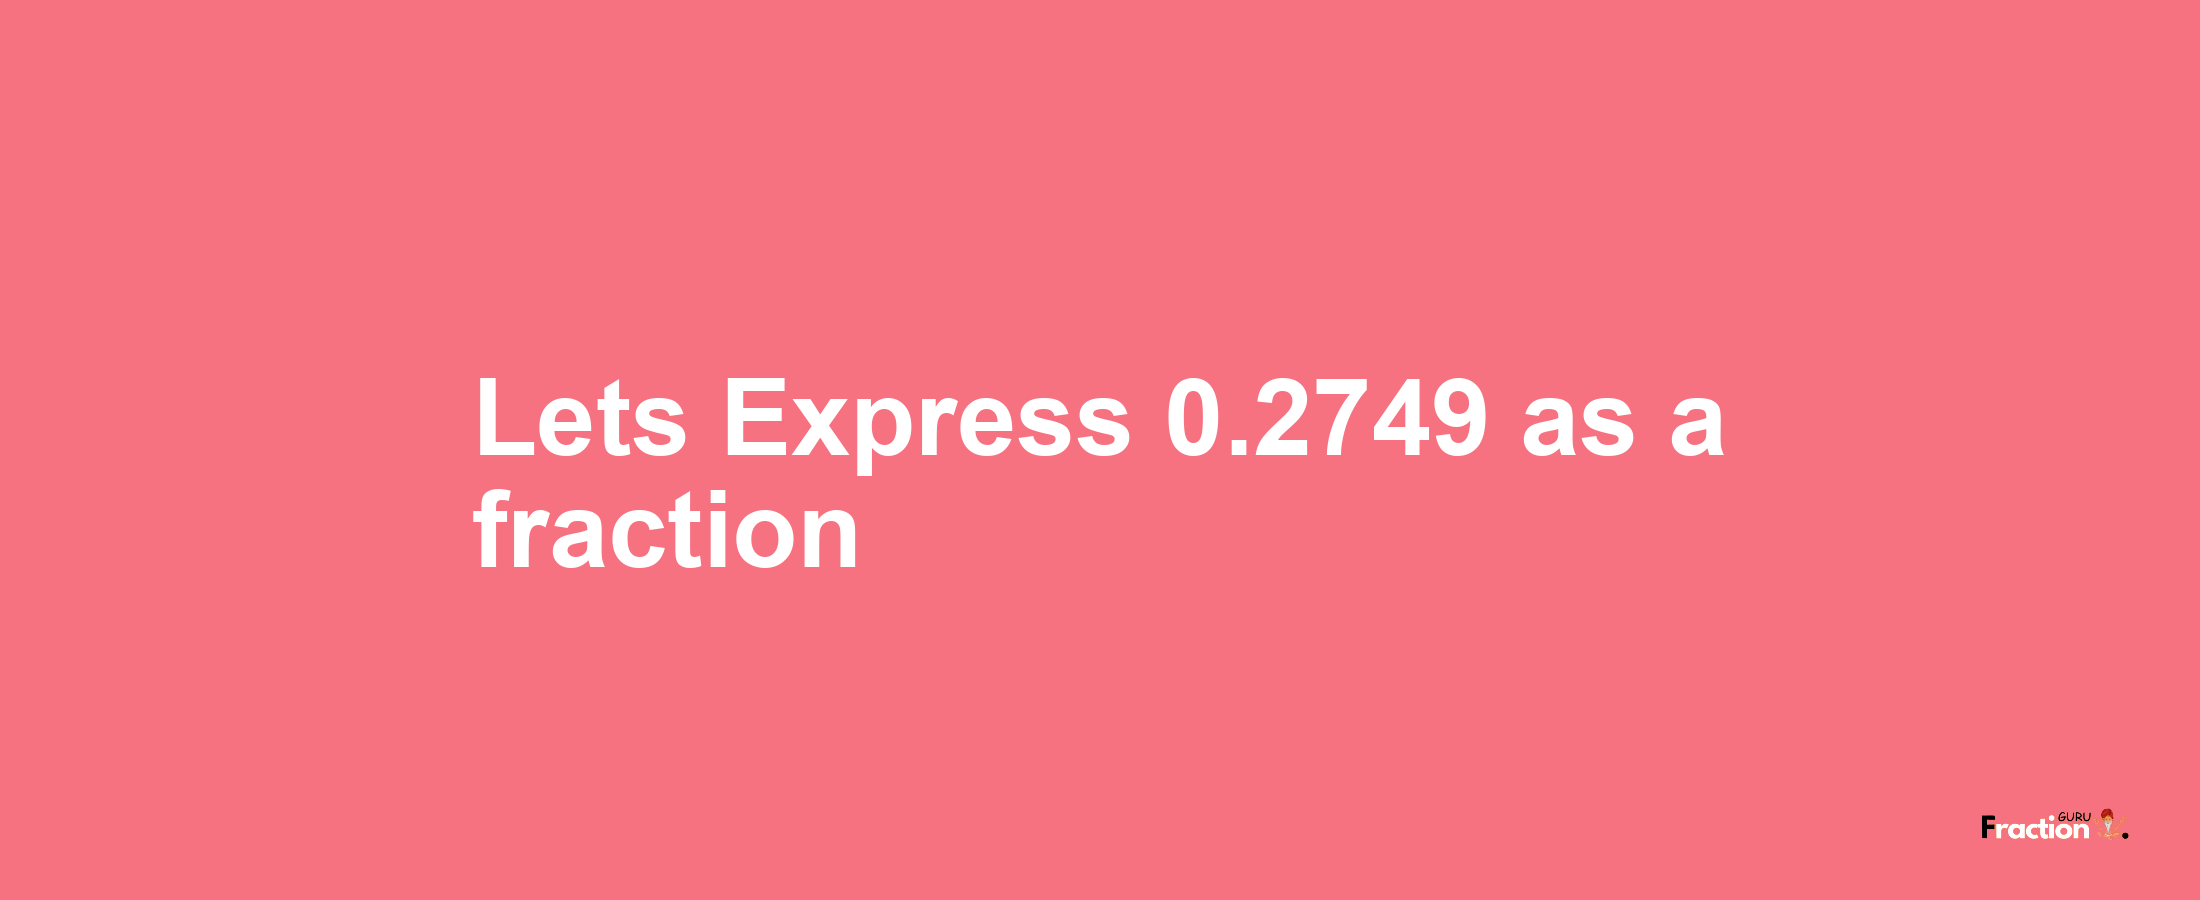 Lets Express 0.2749 as afraction